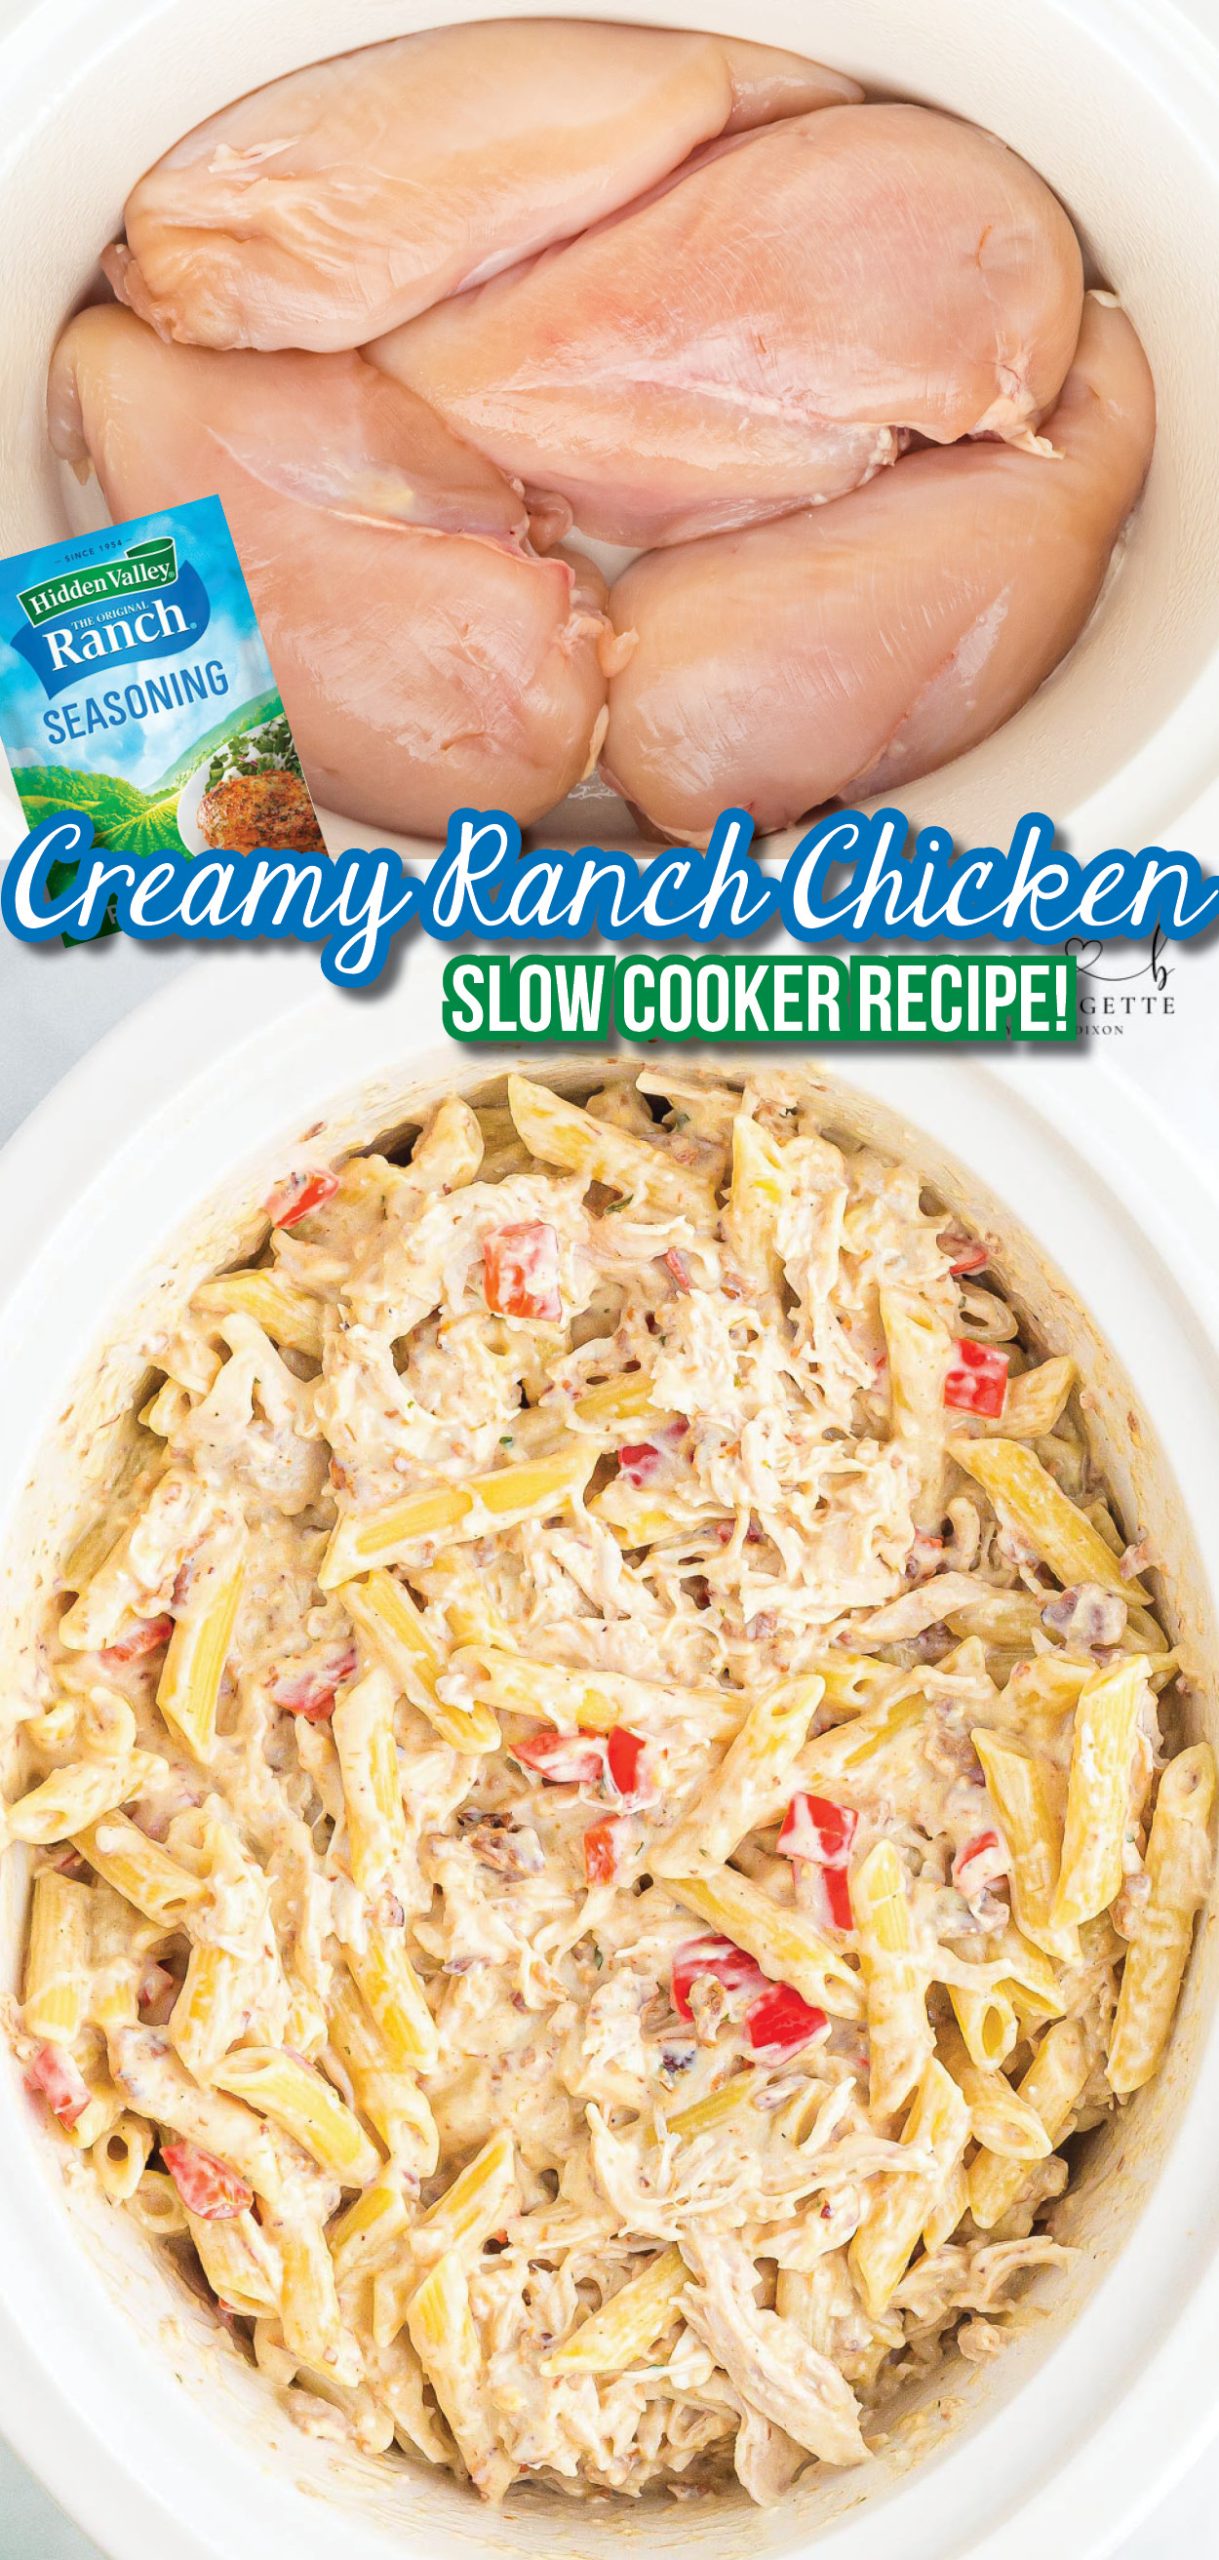 Creamy Ranch Chicken - A seriously addicting, creamy, comfort food ranch chicken recipe that you will love bite after bite!